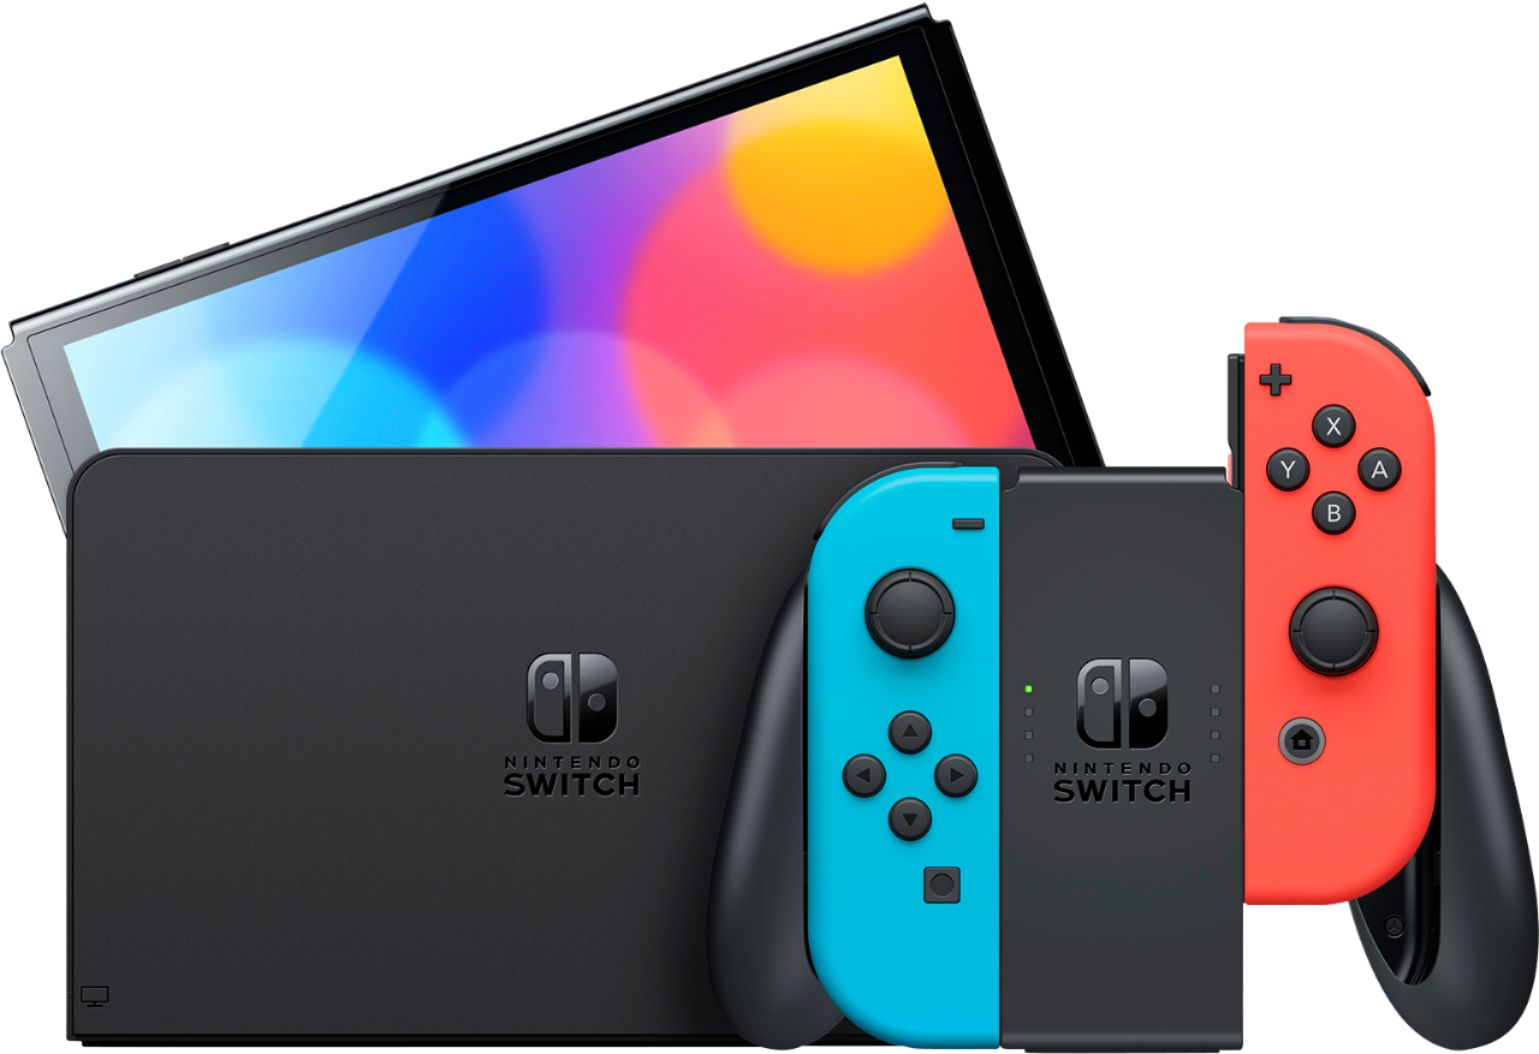 2022 New Nintendo Switch OLED Model Neon Red Blue with 1-2 Switch and Mytrix Full Body Skin Sticker for NS OLED Console, Dock and Joycons - Sushi Set